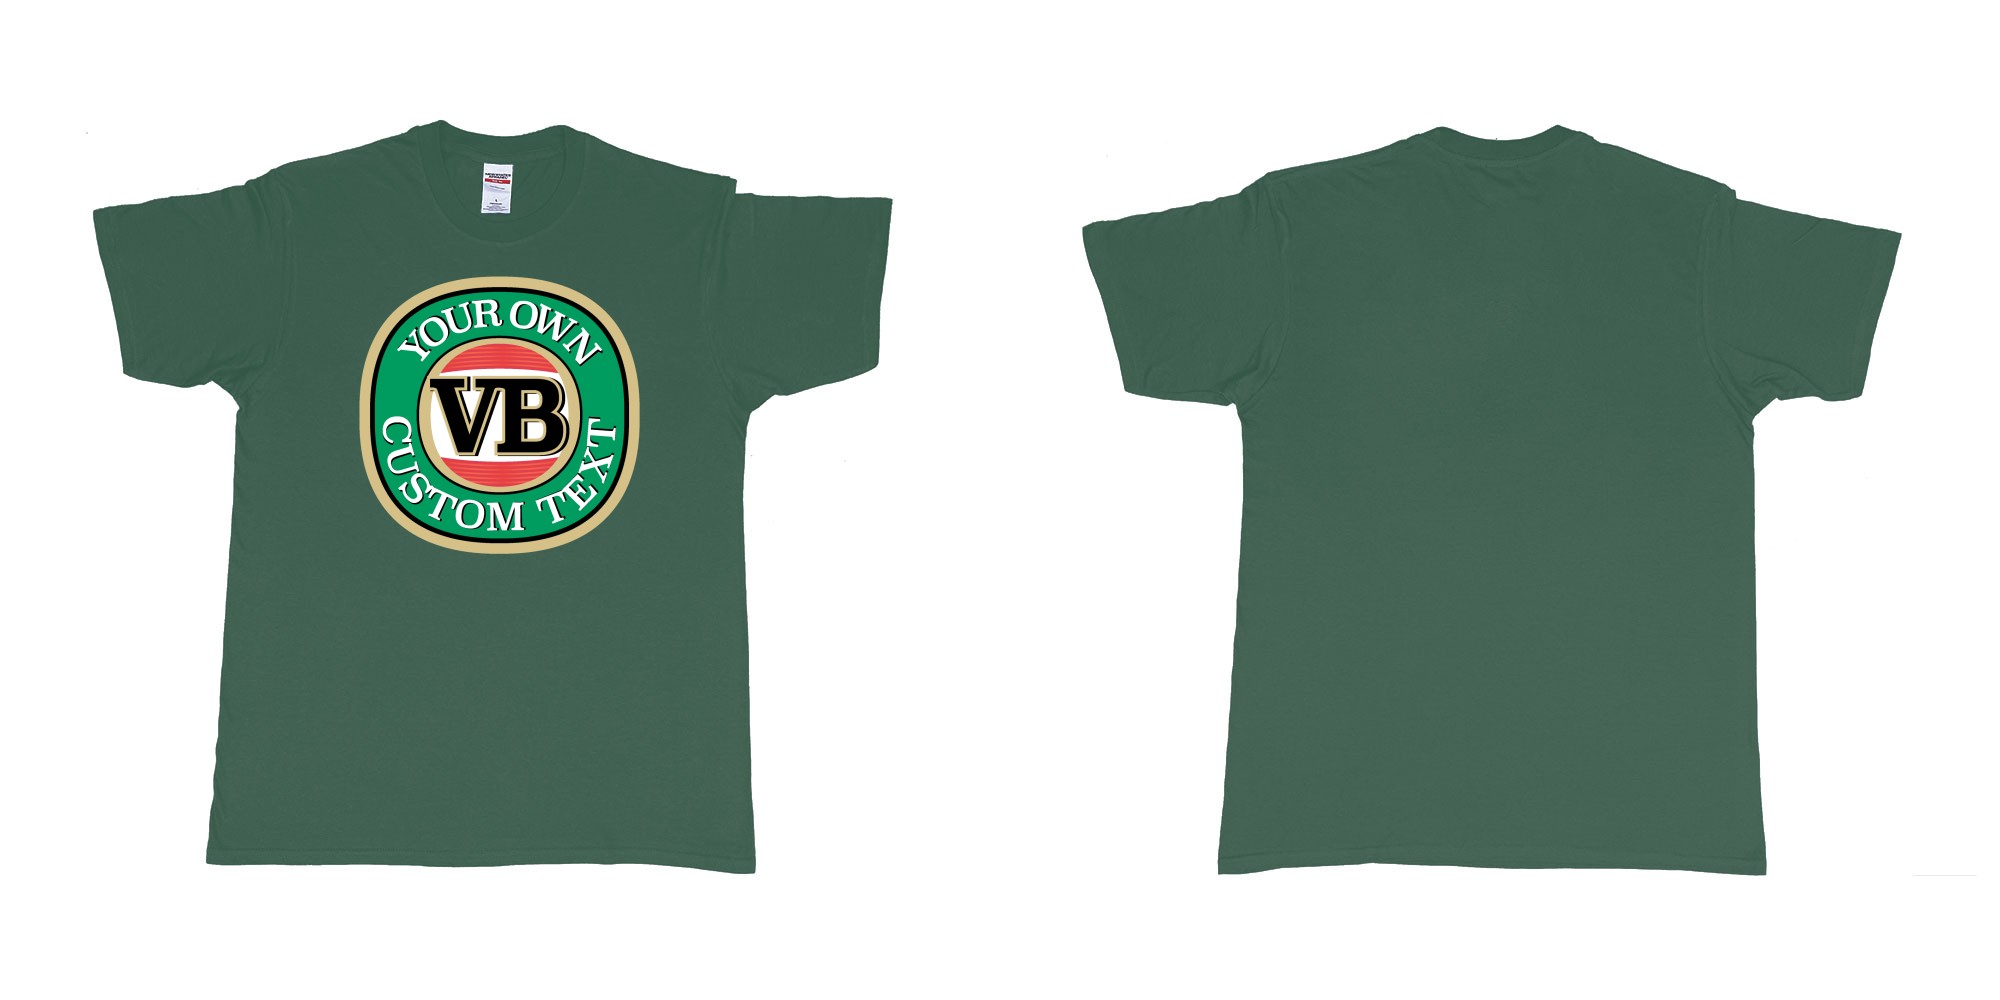 Custom tshirt design vb victoria bitter beer brand logo in fabric color forest-green choice your own text made in Bali by The Pirate Way